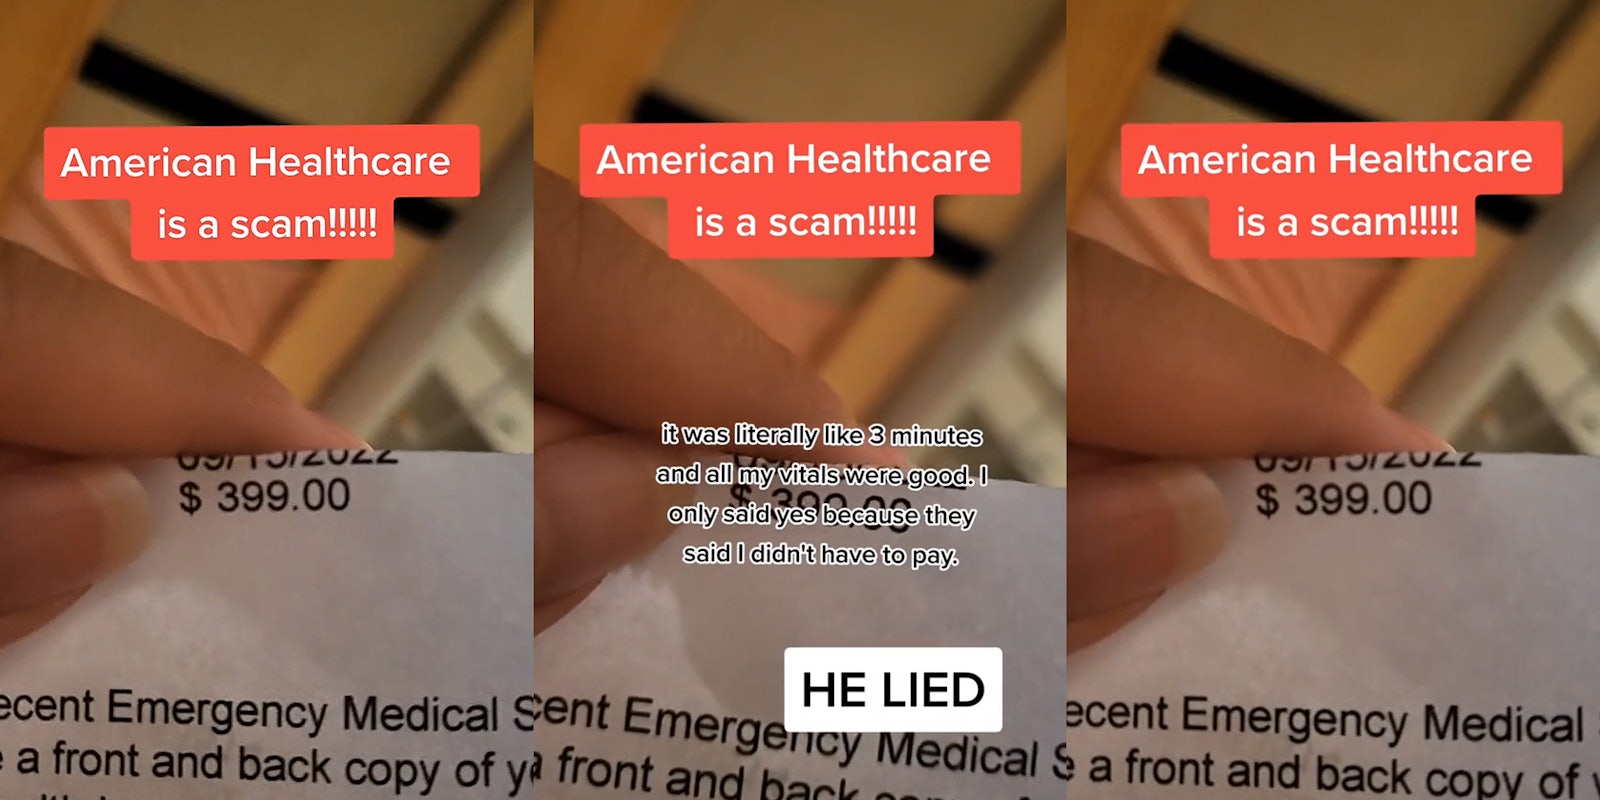 woman holding medical bill '$399.00' caption 'American Healthcare is a scam!!!!!' (l) woman holding medical bill '$399.00' caption 'American Healthcare is a scam!!!!!' ' it was literally like 3 minutes and all my vitals were good. I only said yes because they said I didn't have to pay.' 'HE LIED' (c) woman holding medical bill '$399.00' caption 'American Healthcare is a scam!!!!!' (r)